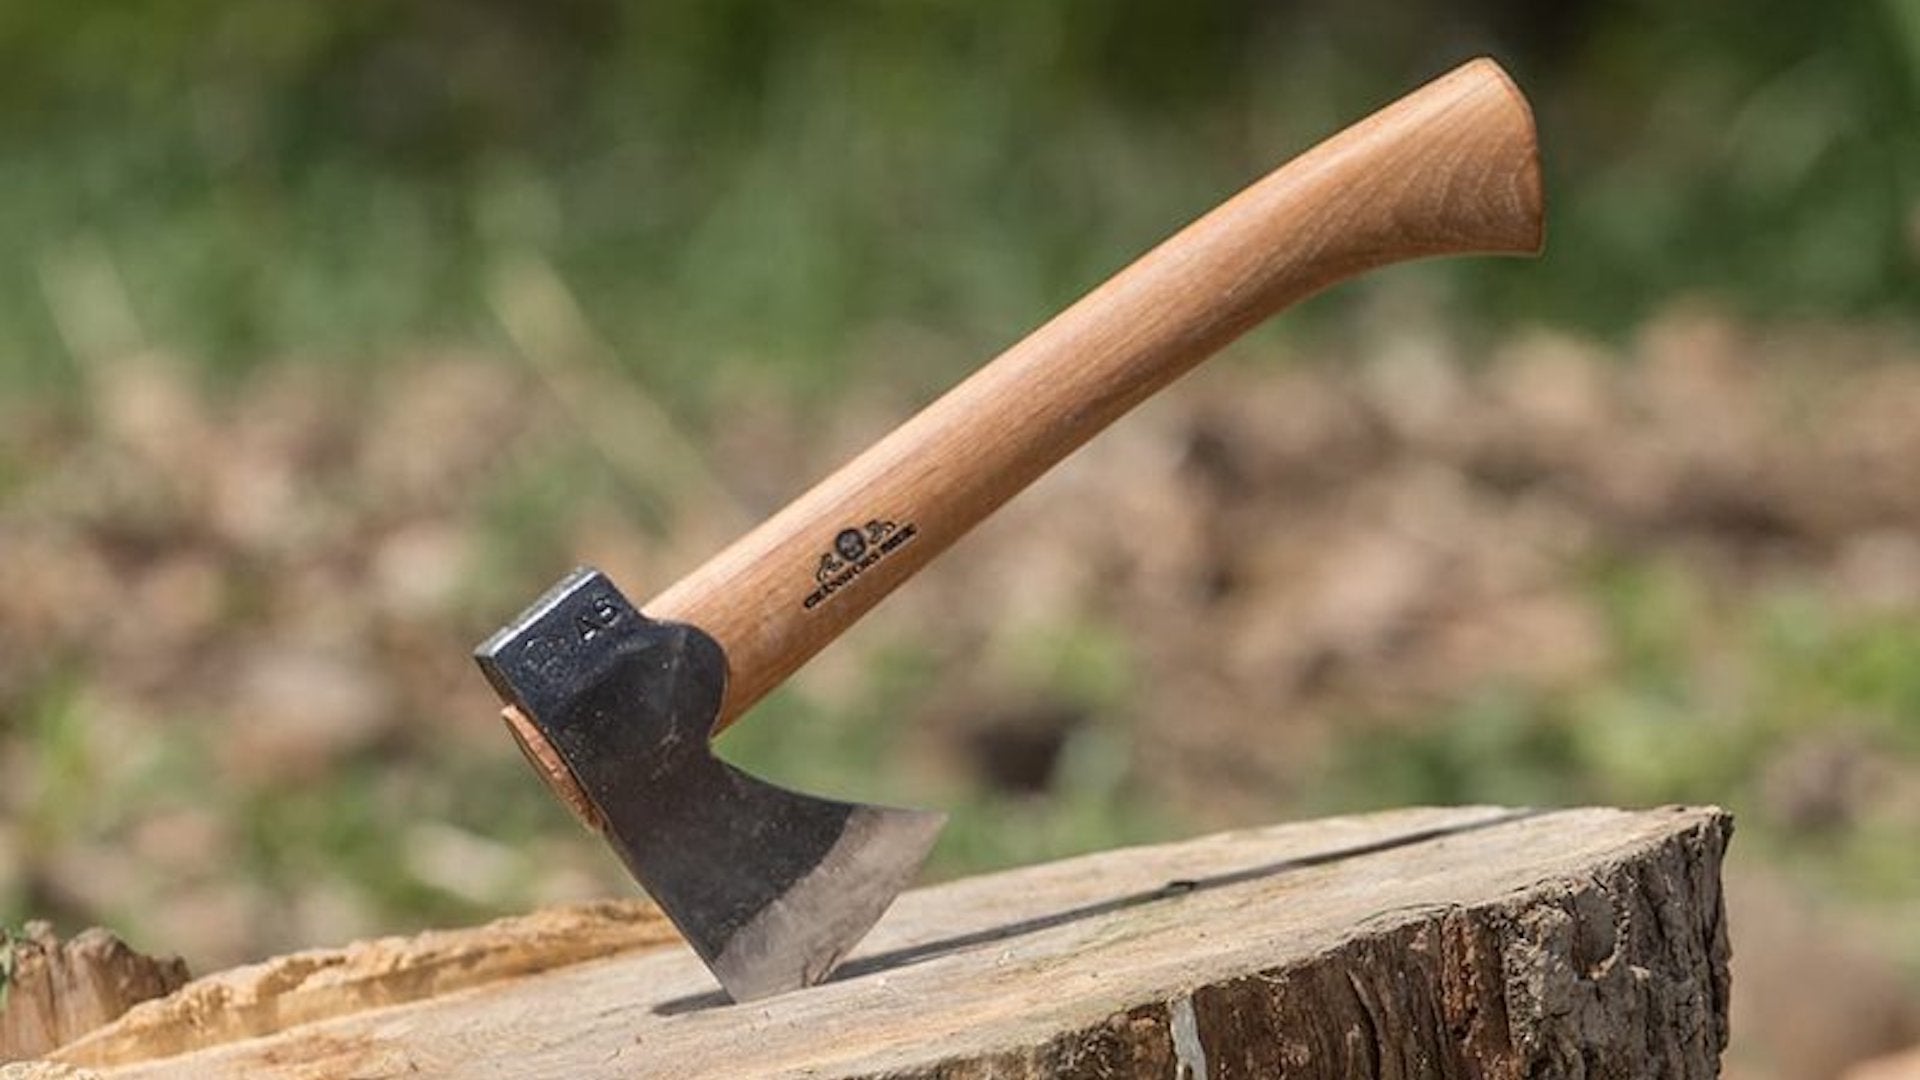 Bushcraft Hatchet Hiking Hatchet Axe for bushcraft axe for using in a forest